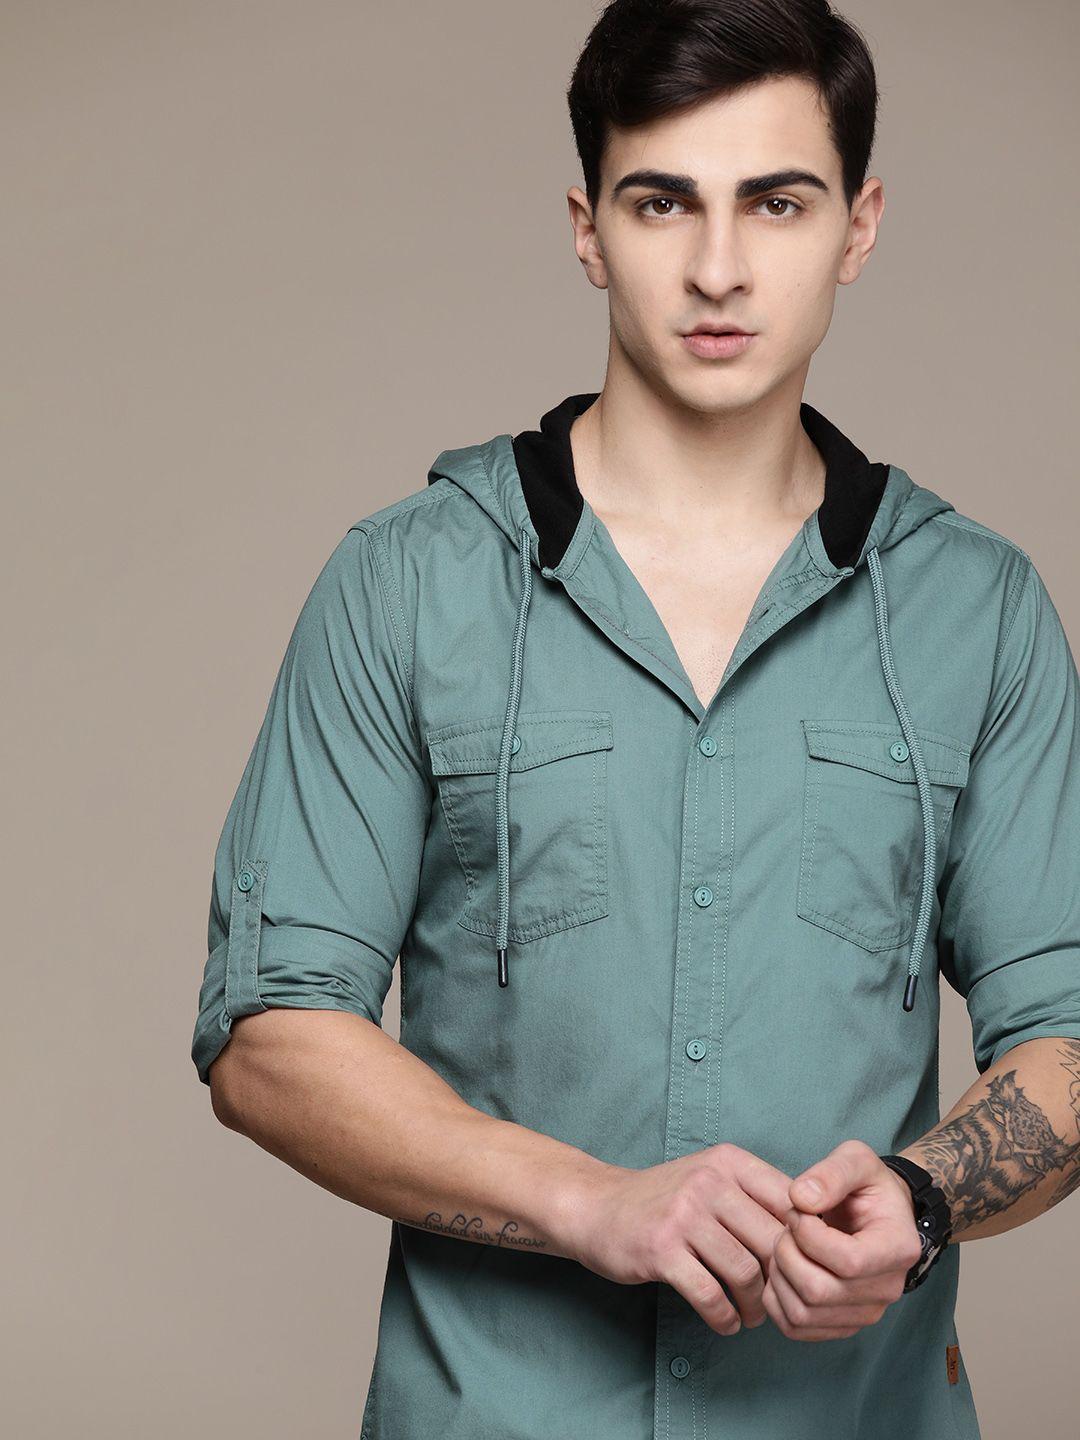 the roadster lifestyle co. cotton hooded casual shirt